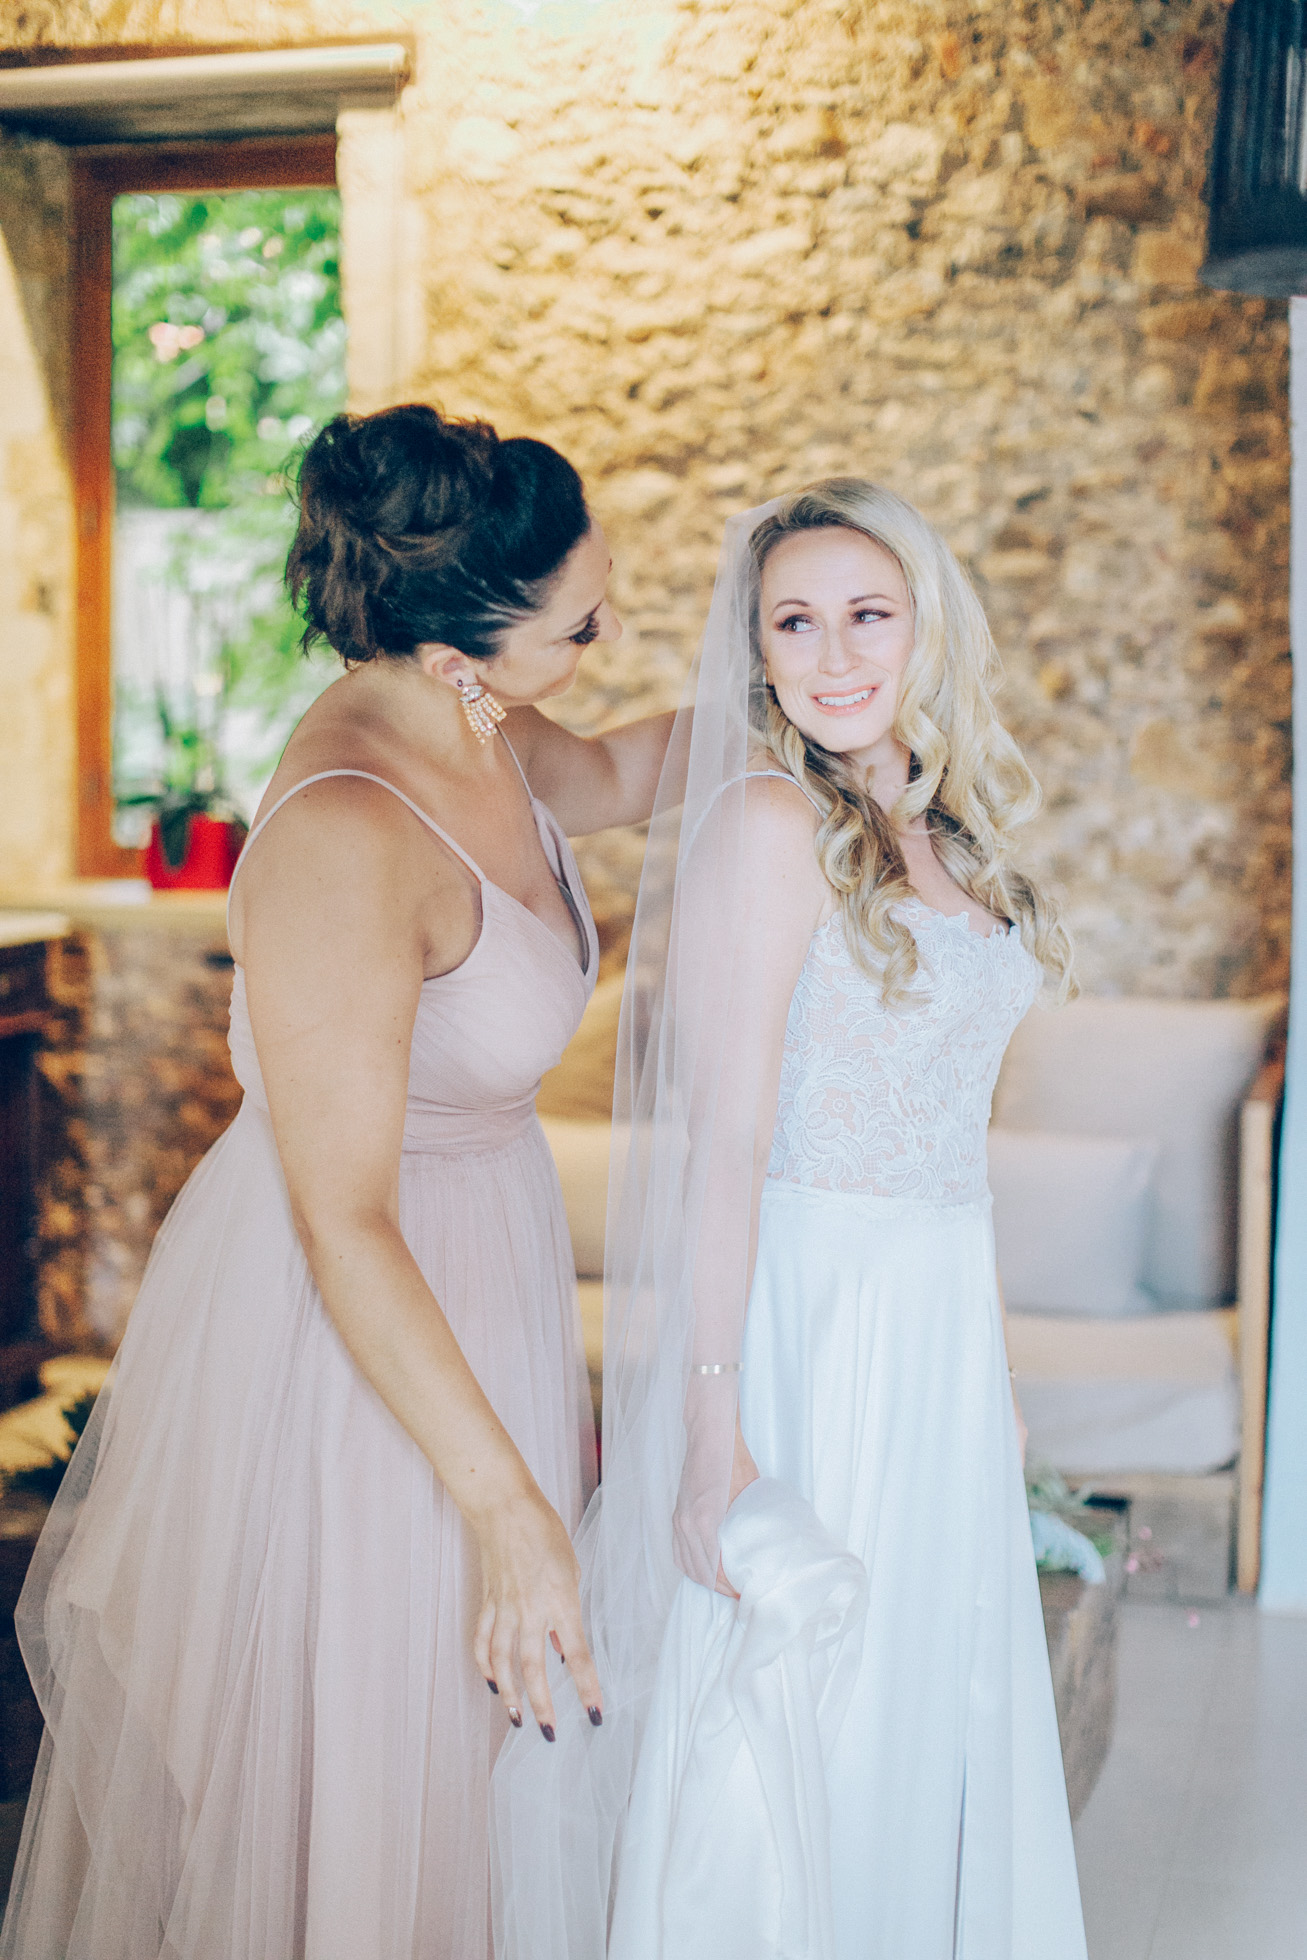 Beautiful bride with her maid of honor posing for the wedding photographer on a summer wedding day in Chania, Crete.